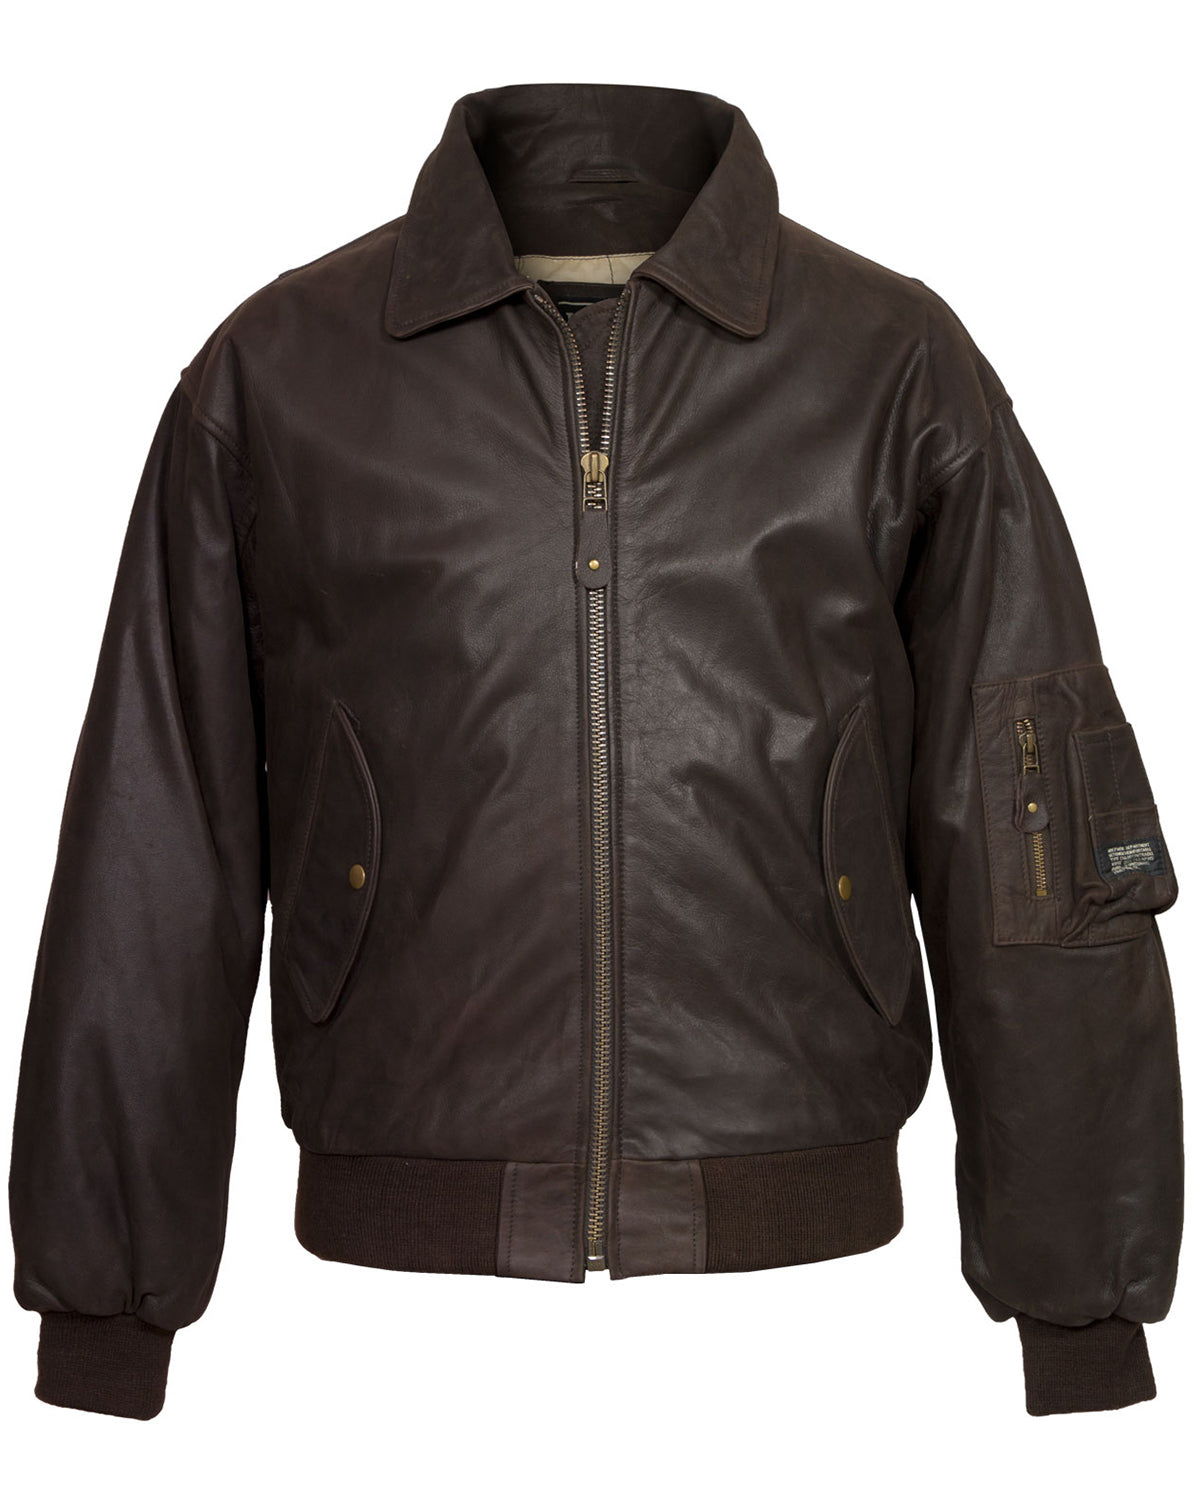 MotorCycleJackets Mens A-2 Brown Leather Bomber Jacket